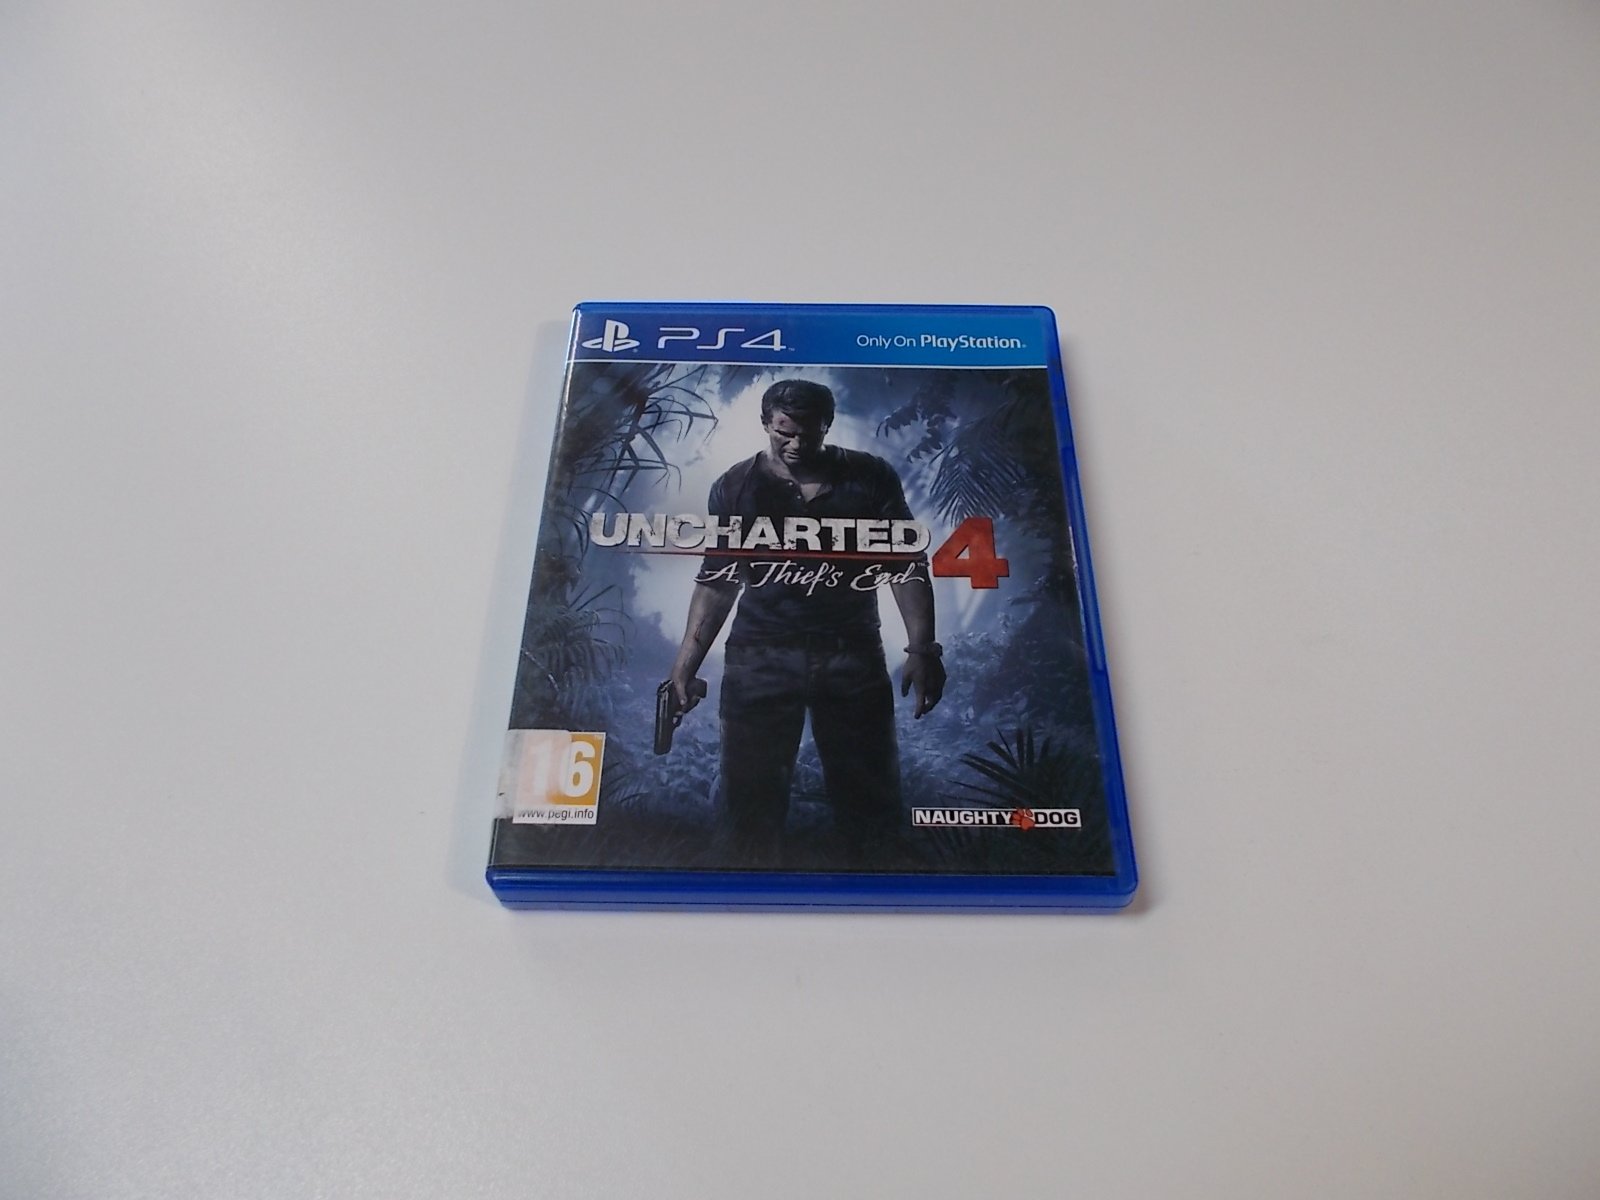 Uncharted 4: A Thief's End - GRA Ps4 - Opole 0535